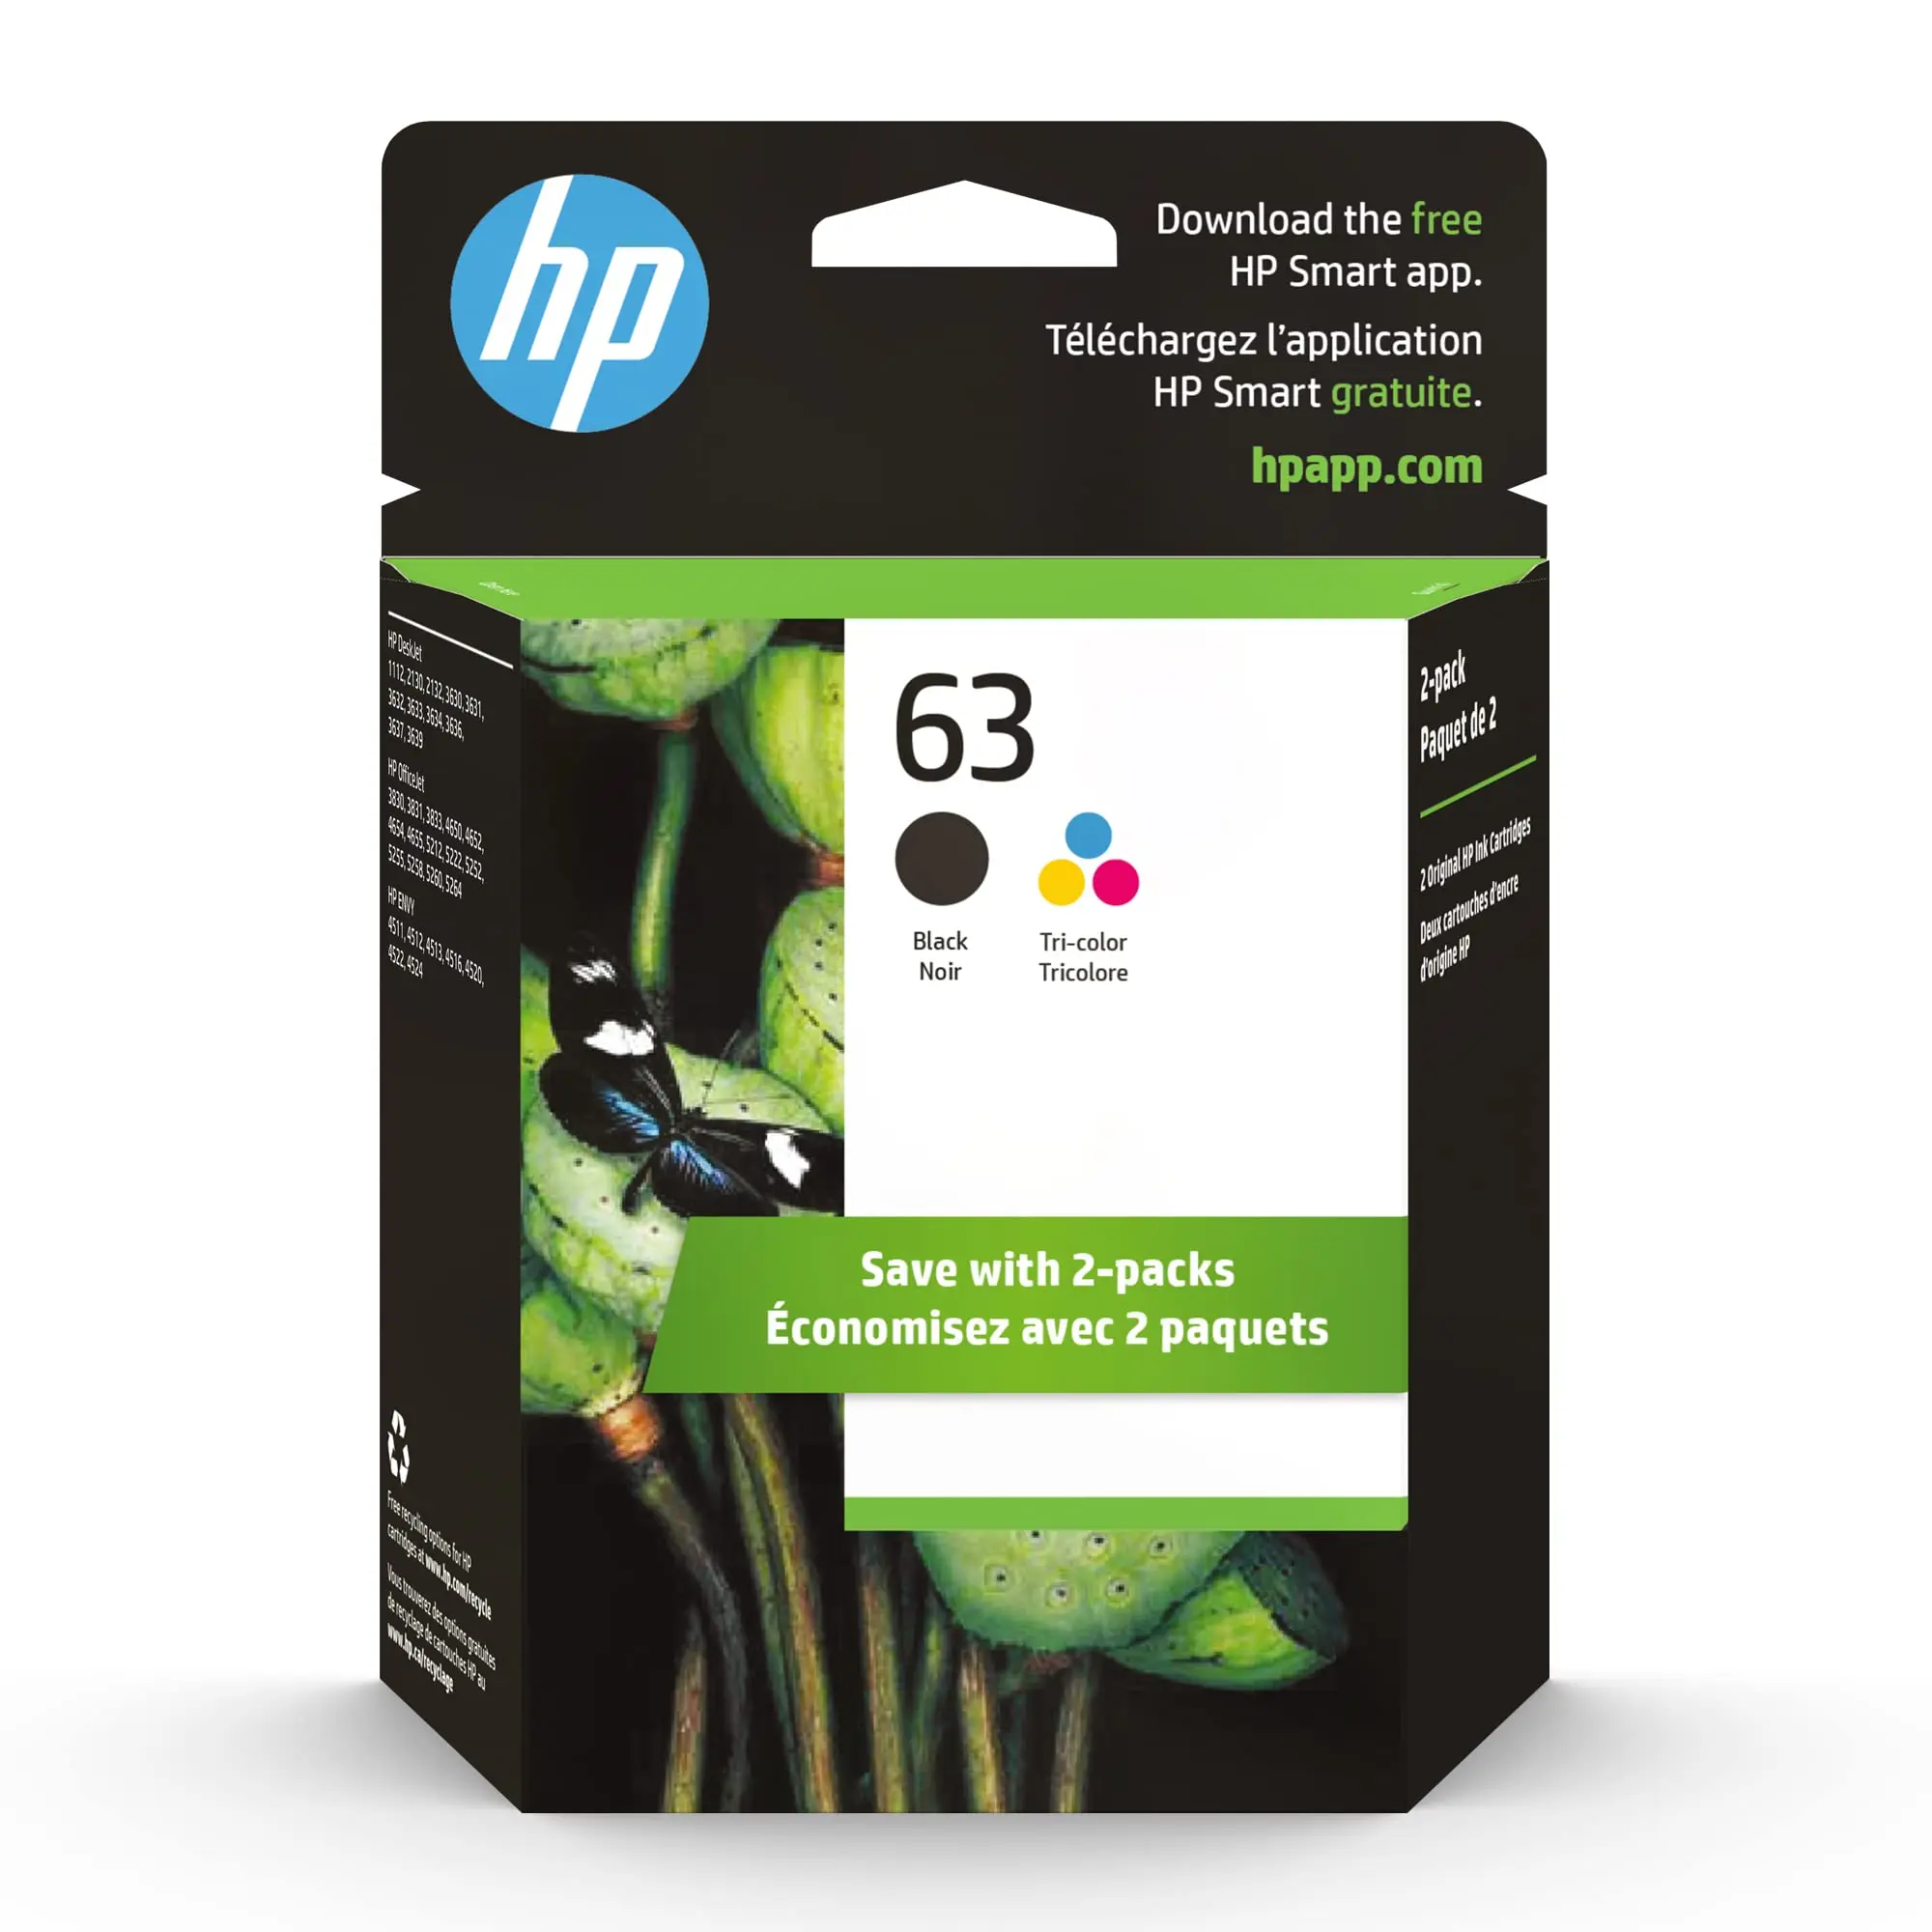 hewlett packard 63 color - How do I know what color my HP printer is